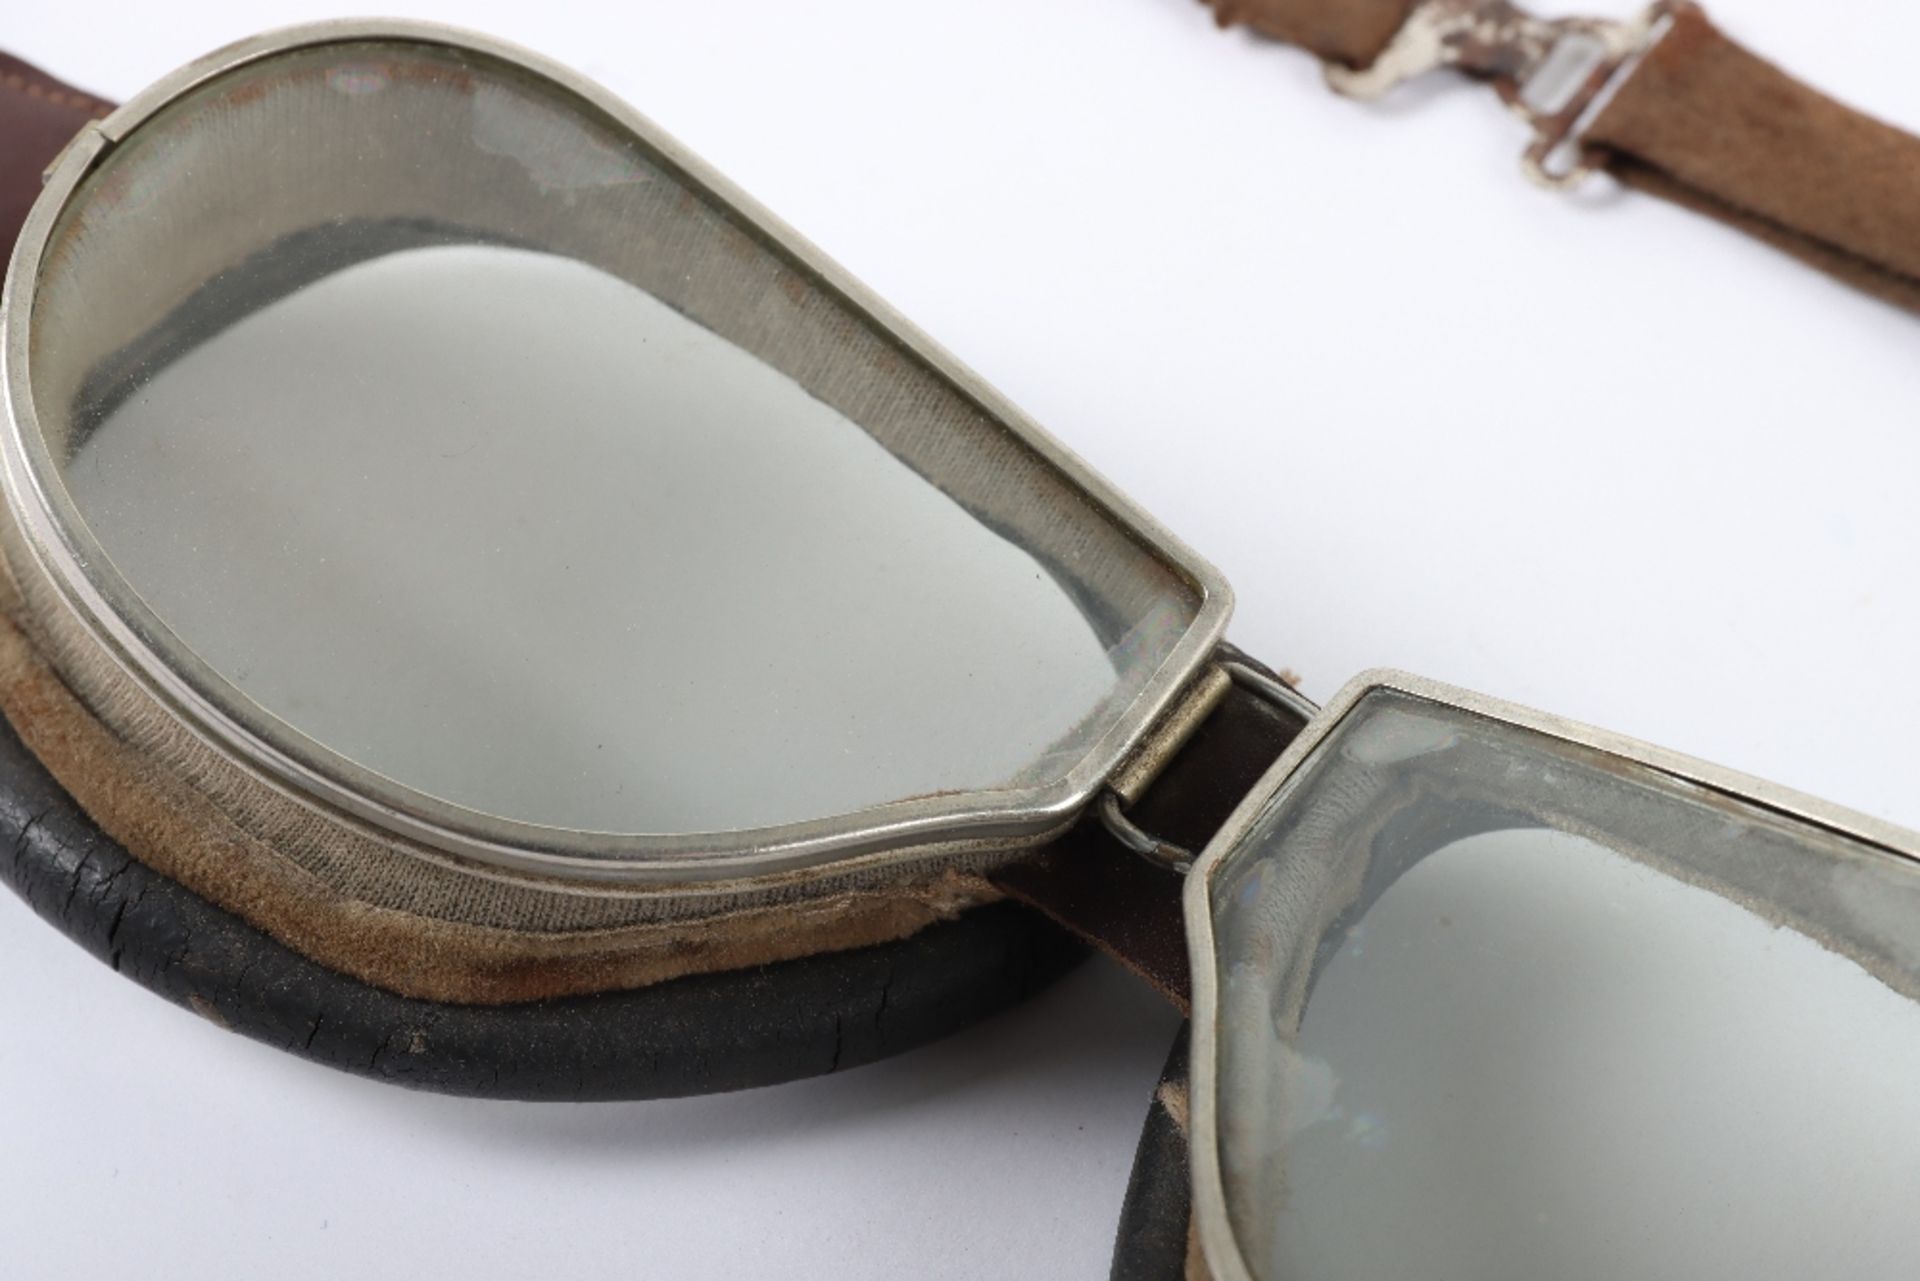 Pair of Early Aviators Goggles - Image 2 of 5